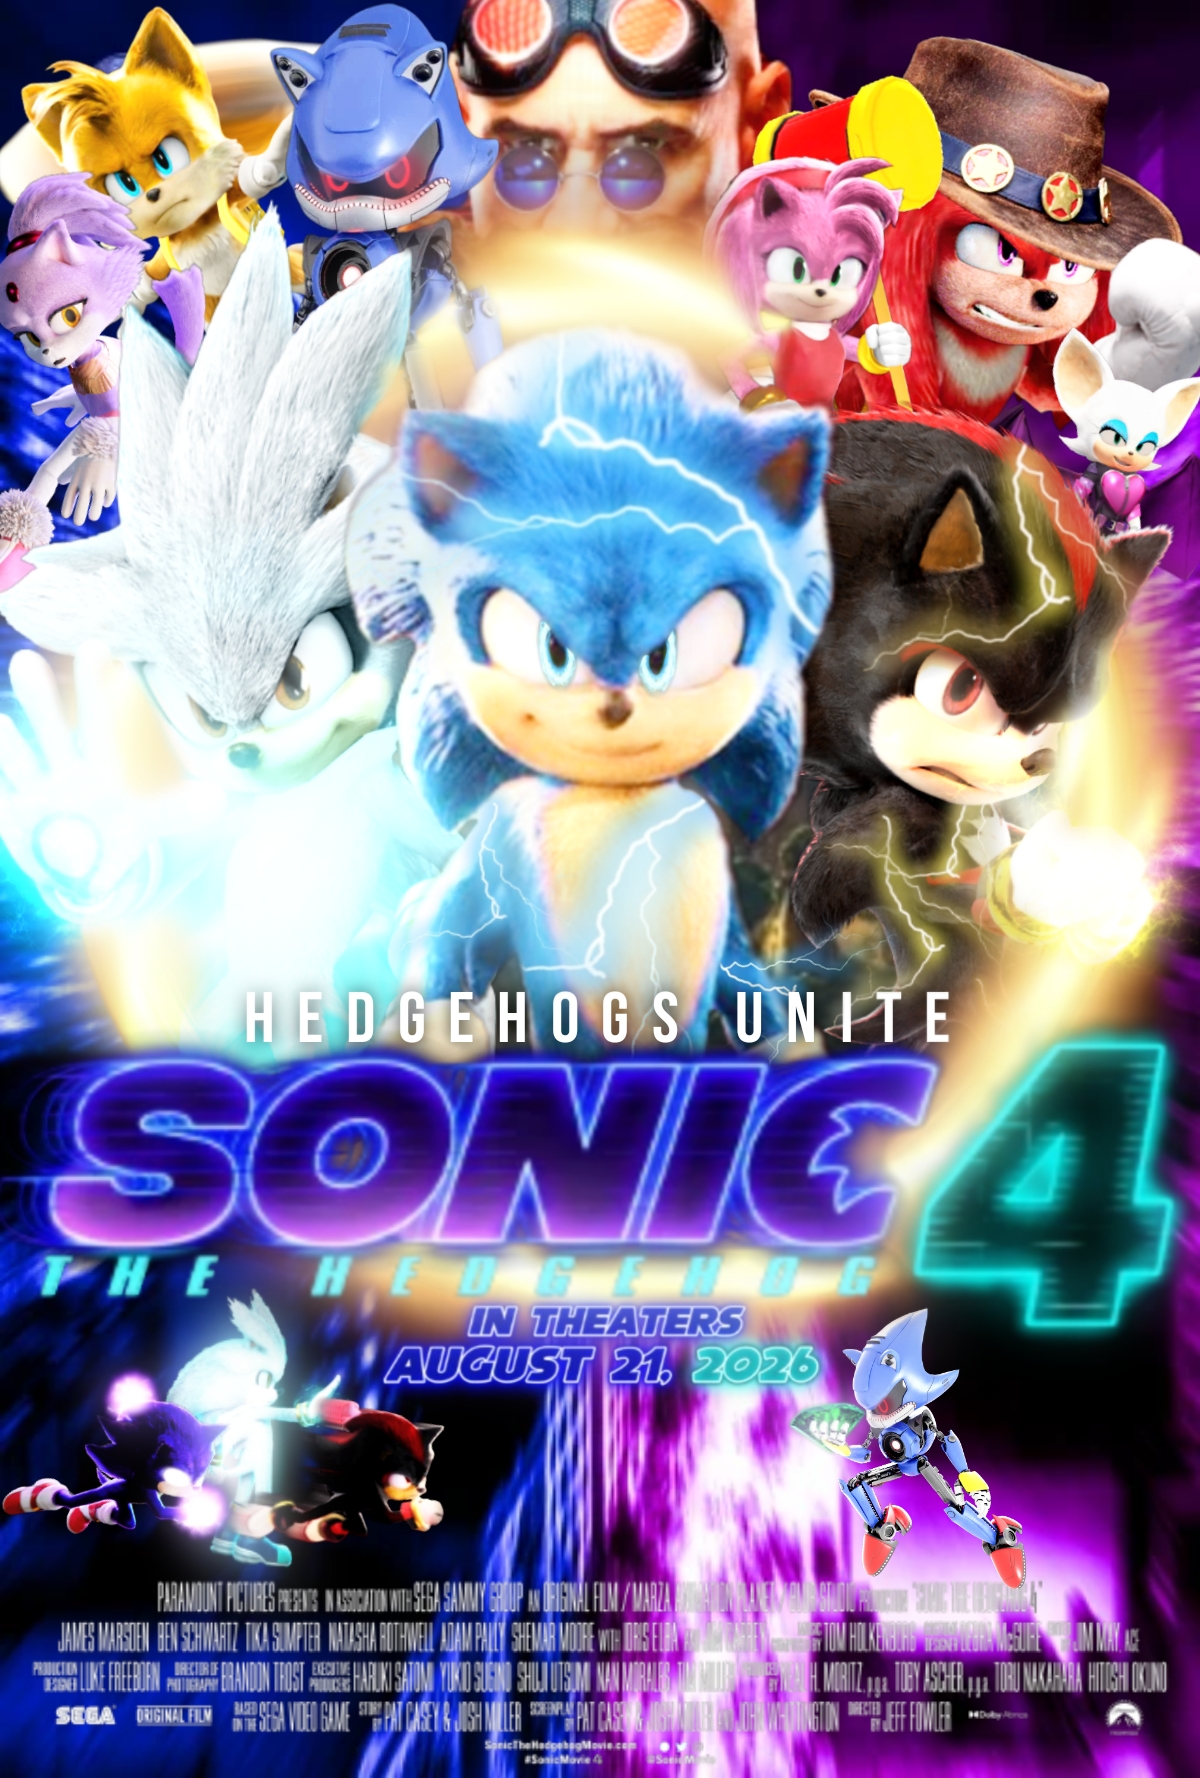 Sonic Movie 3 Poster(Fan Made) by TailsTheDesigner92 on DeviantArt